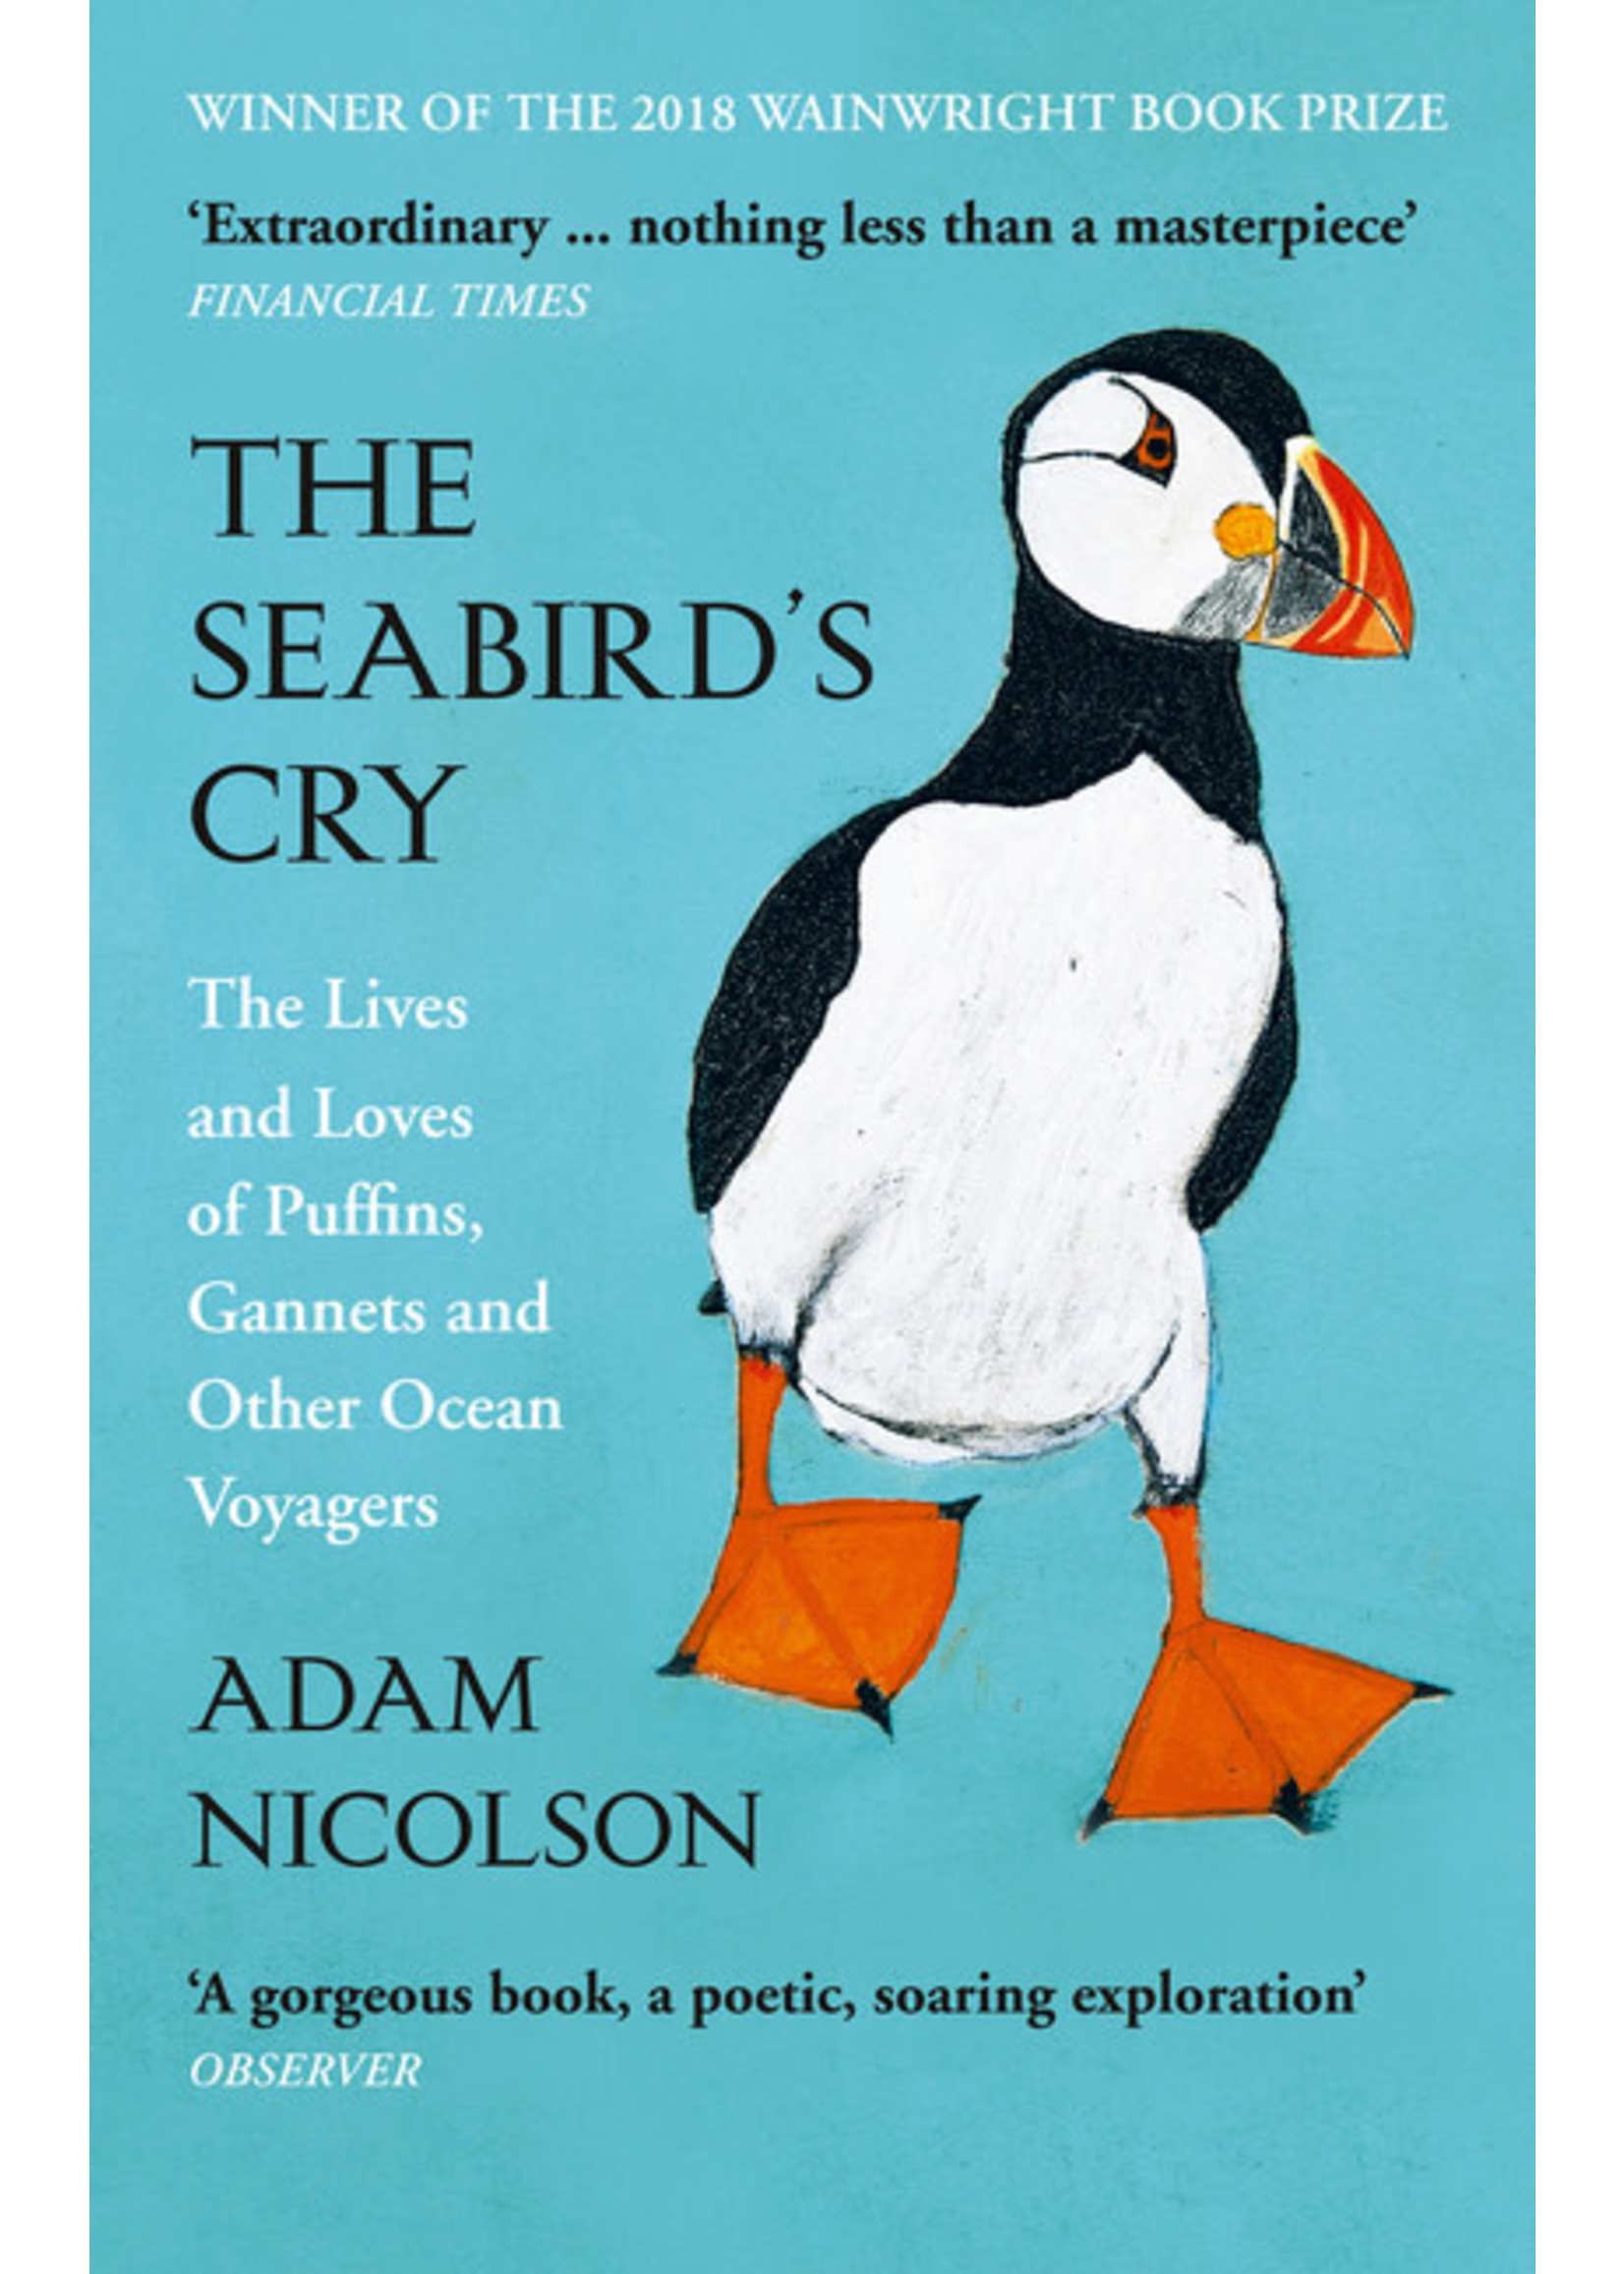 The Seabird’s Cry: The Lives and Loves of Puffins, Gannets and Other Ocean Voyagers by Adam Nicolson, Kate Boxer